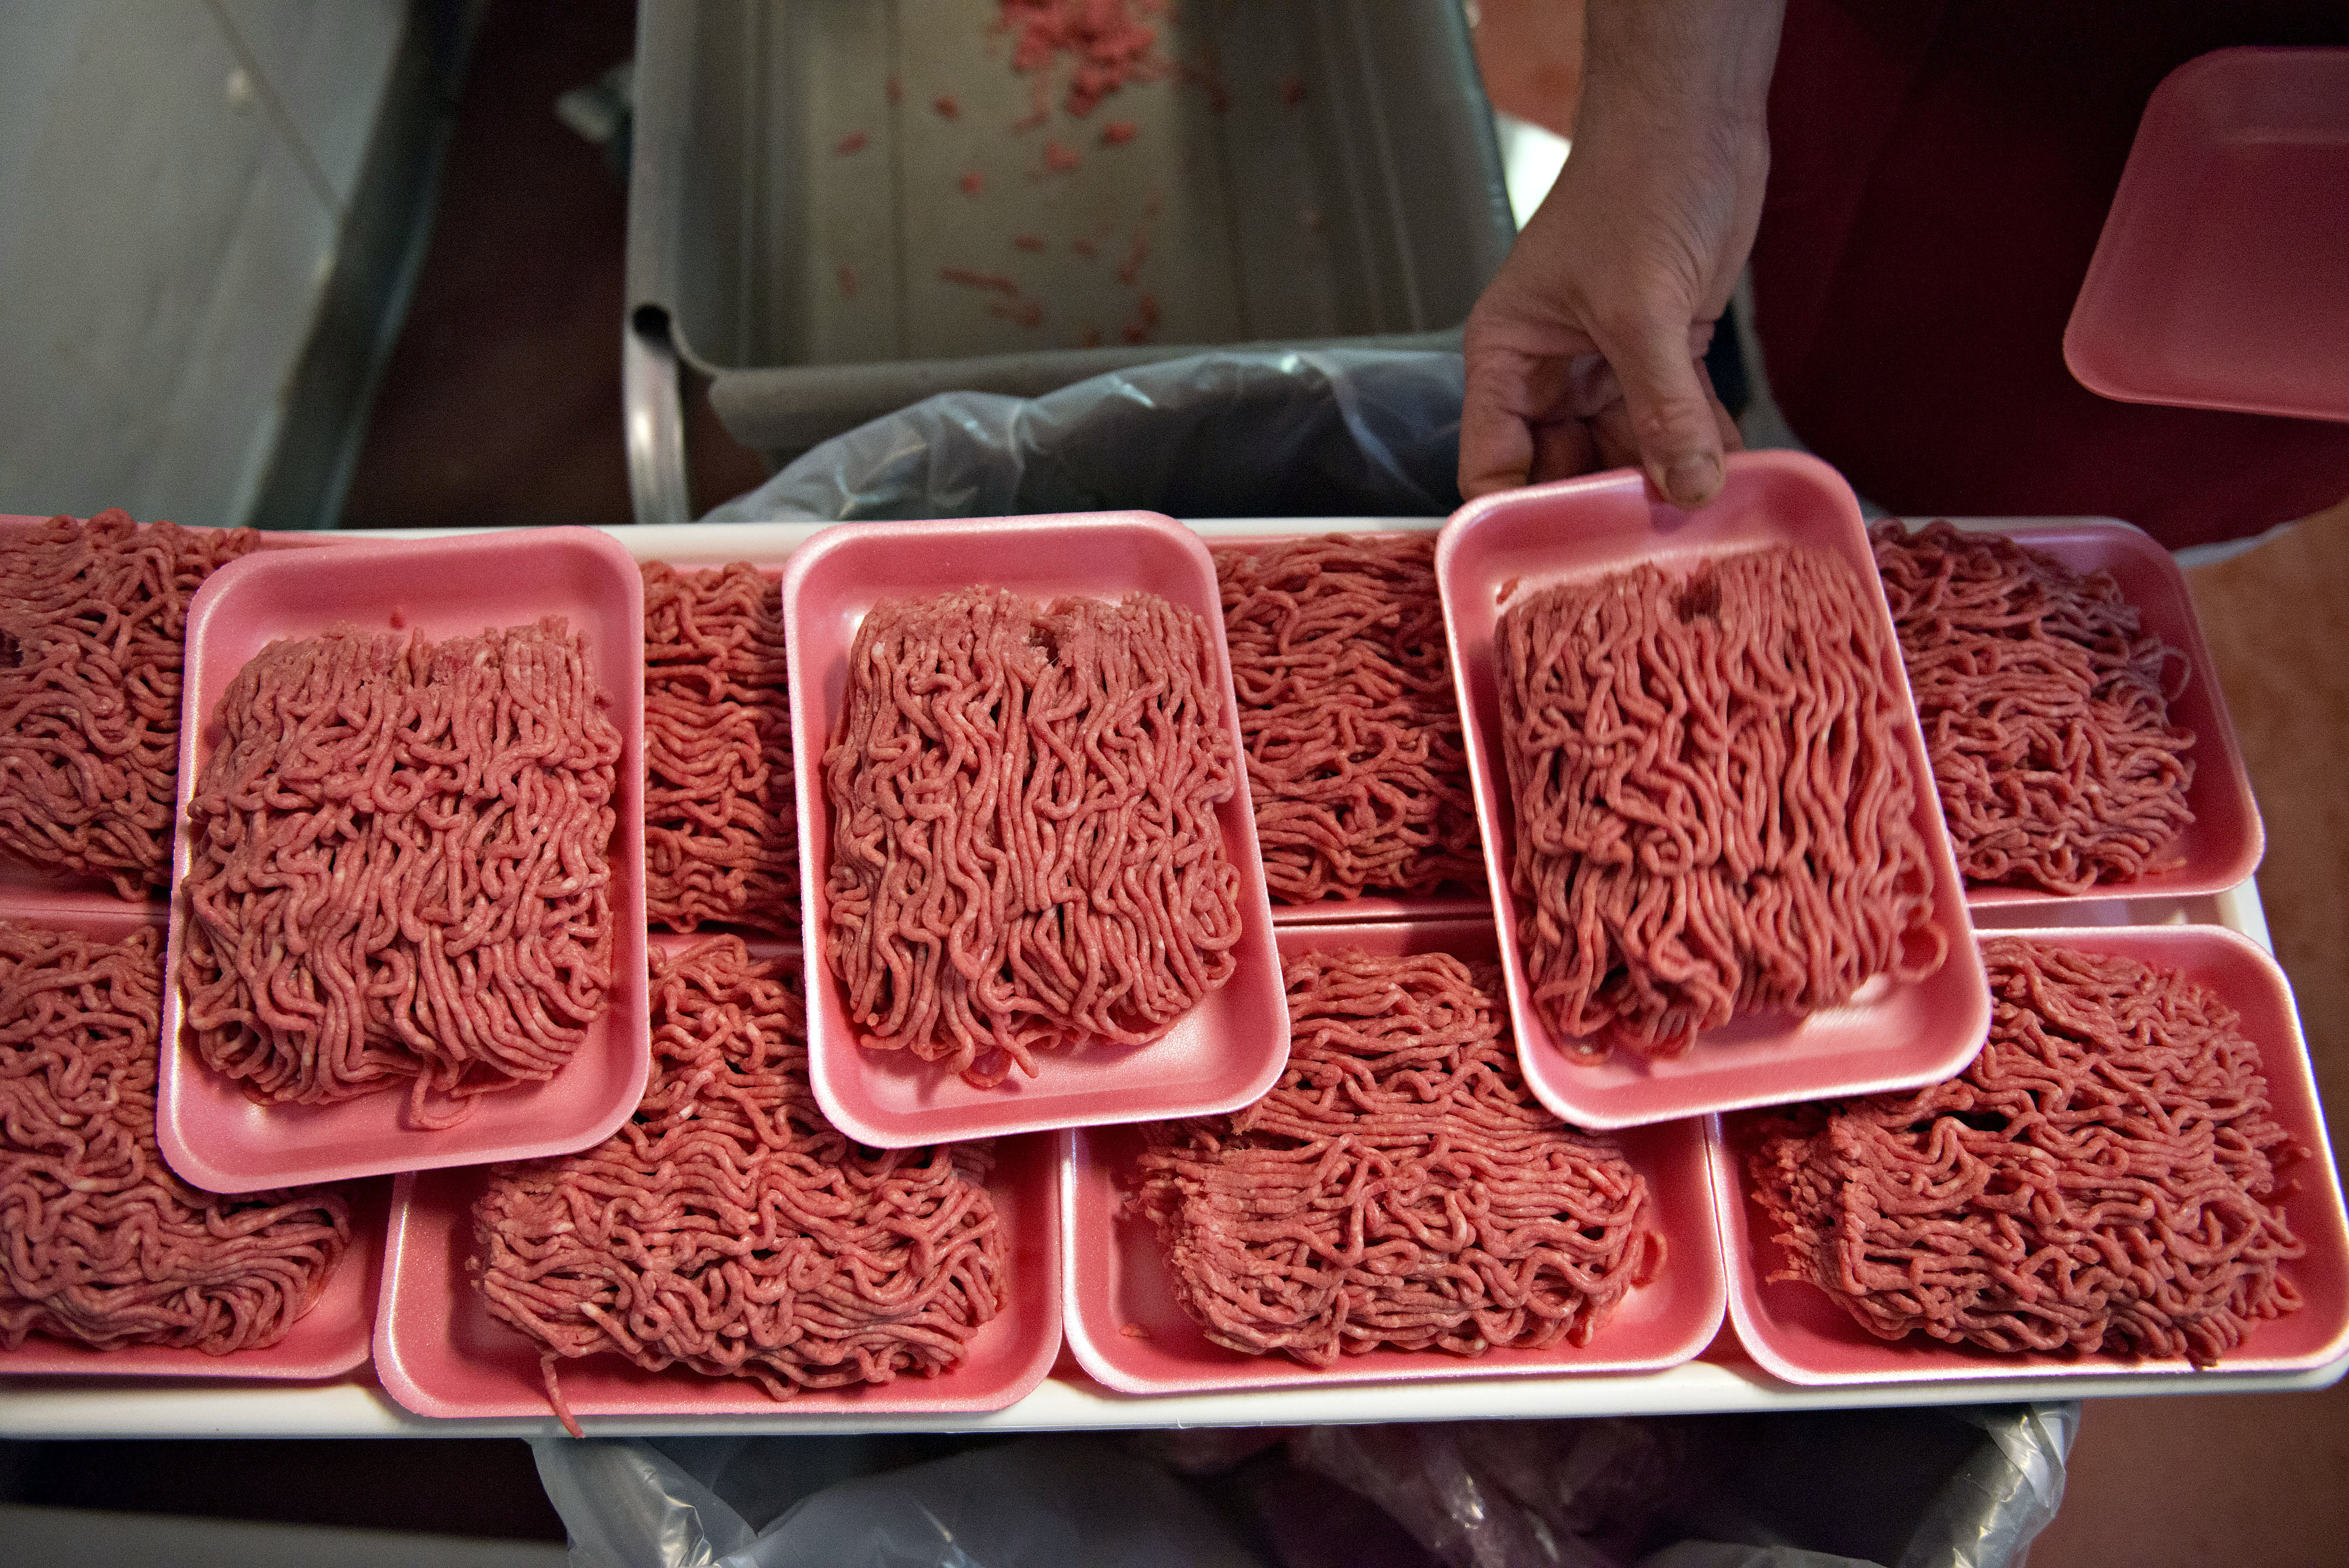 Ground beef is portioned onto trays at a supermarket meat department, July 2, 2014. (Daniel Acker—Bloomberg/Getty Images)